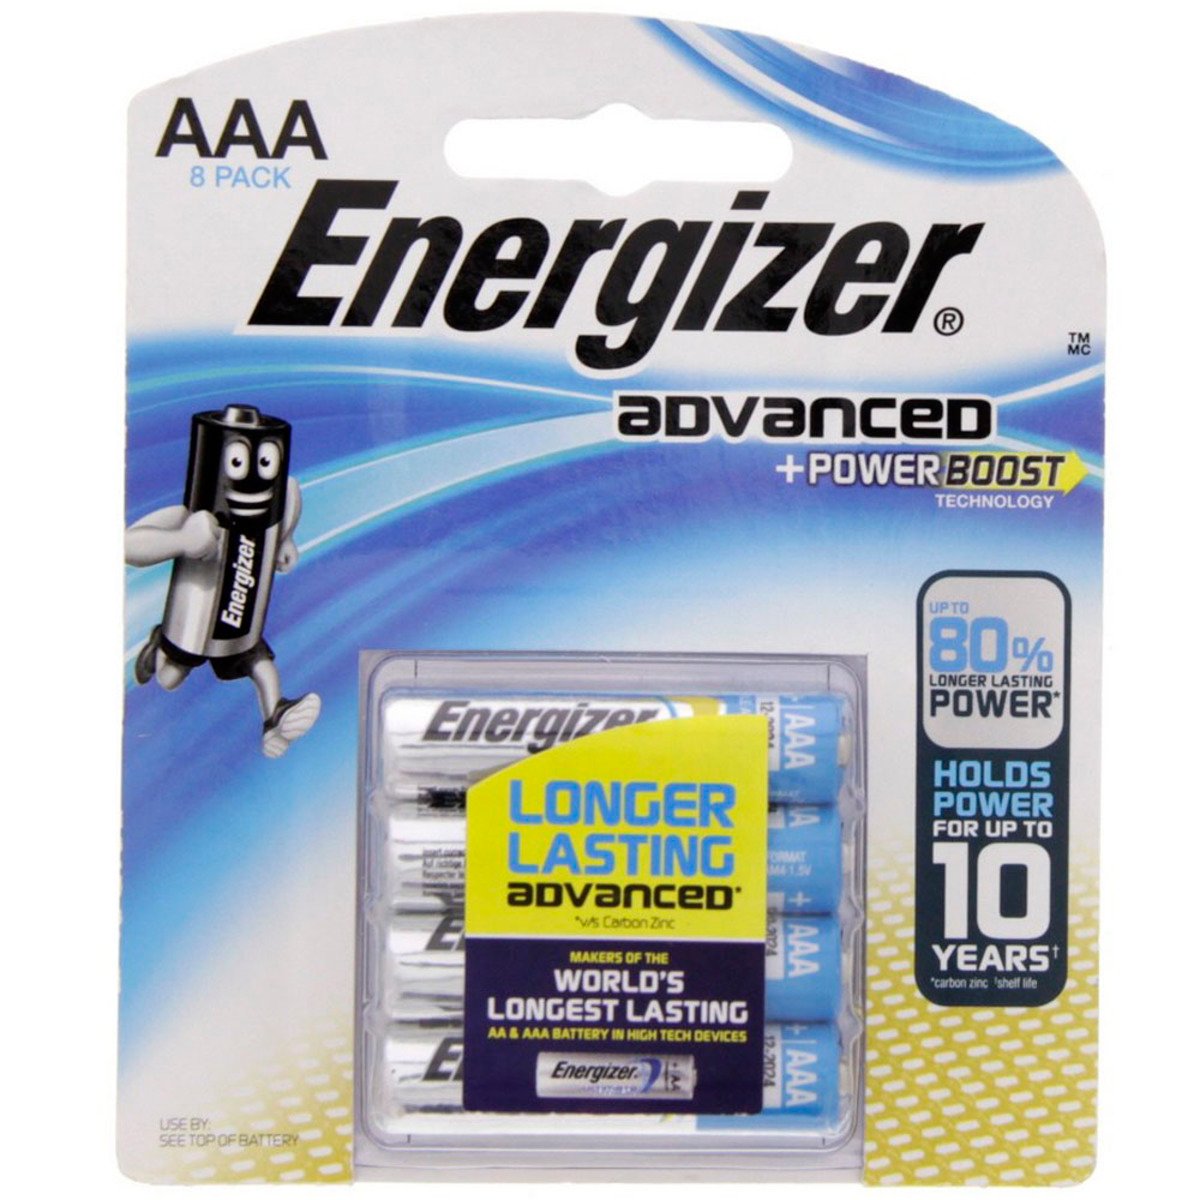 Energizer Advanced + Power Boost AAA Battery X92RP8